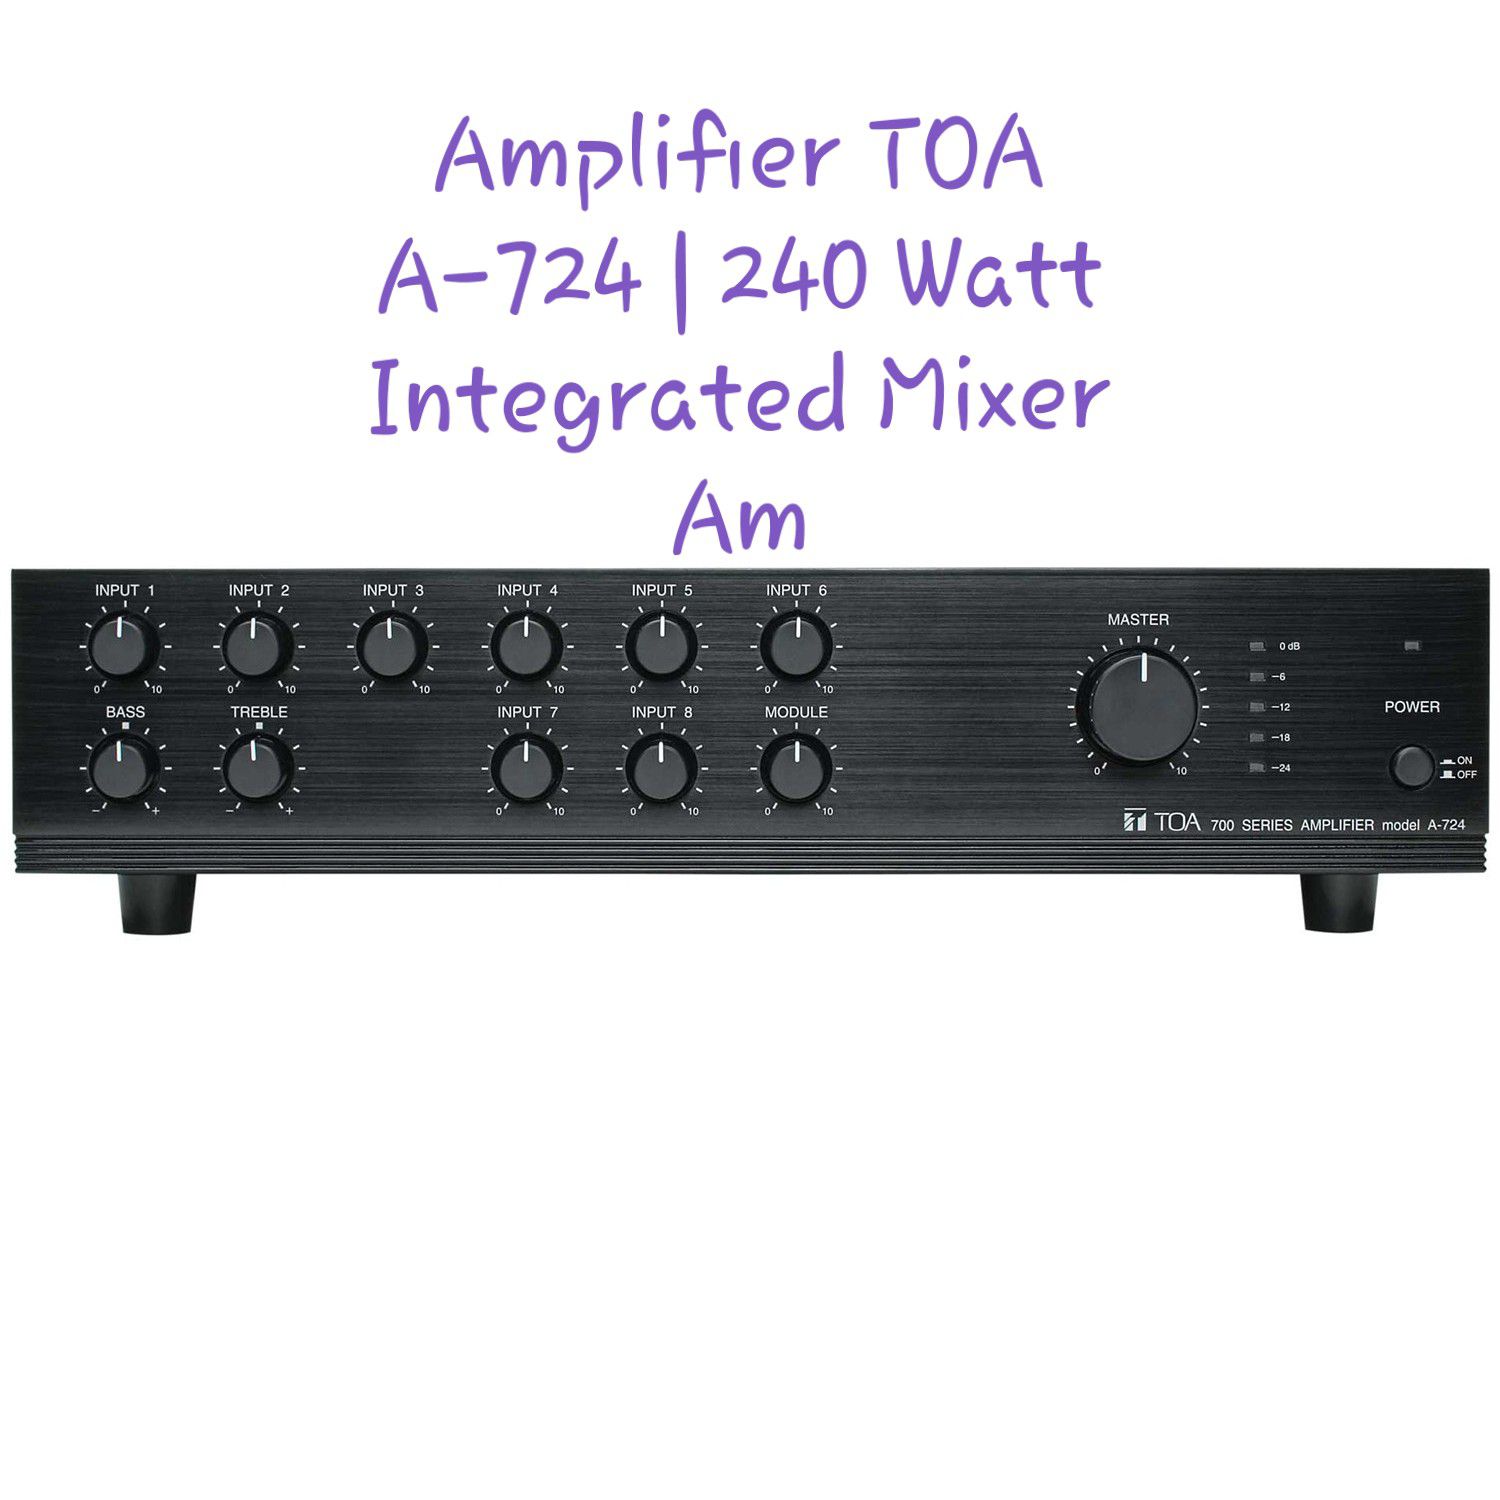 Amplifier TOA A-724 | 240 Watt Integrated Mixer Amp / Synth or Drum Machine Trades Accepted about same value